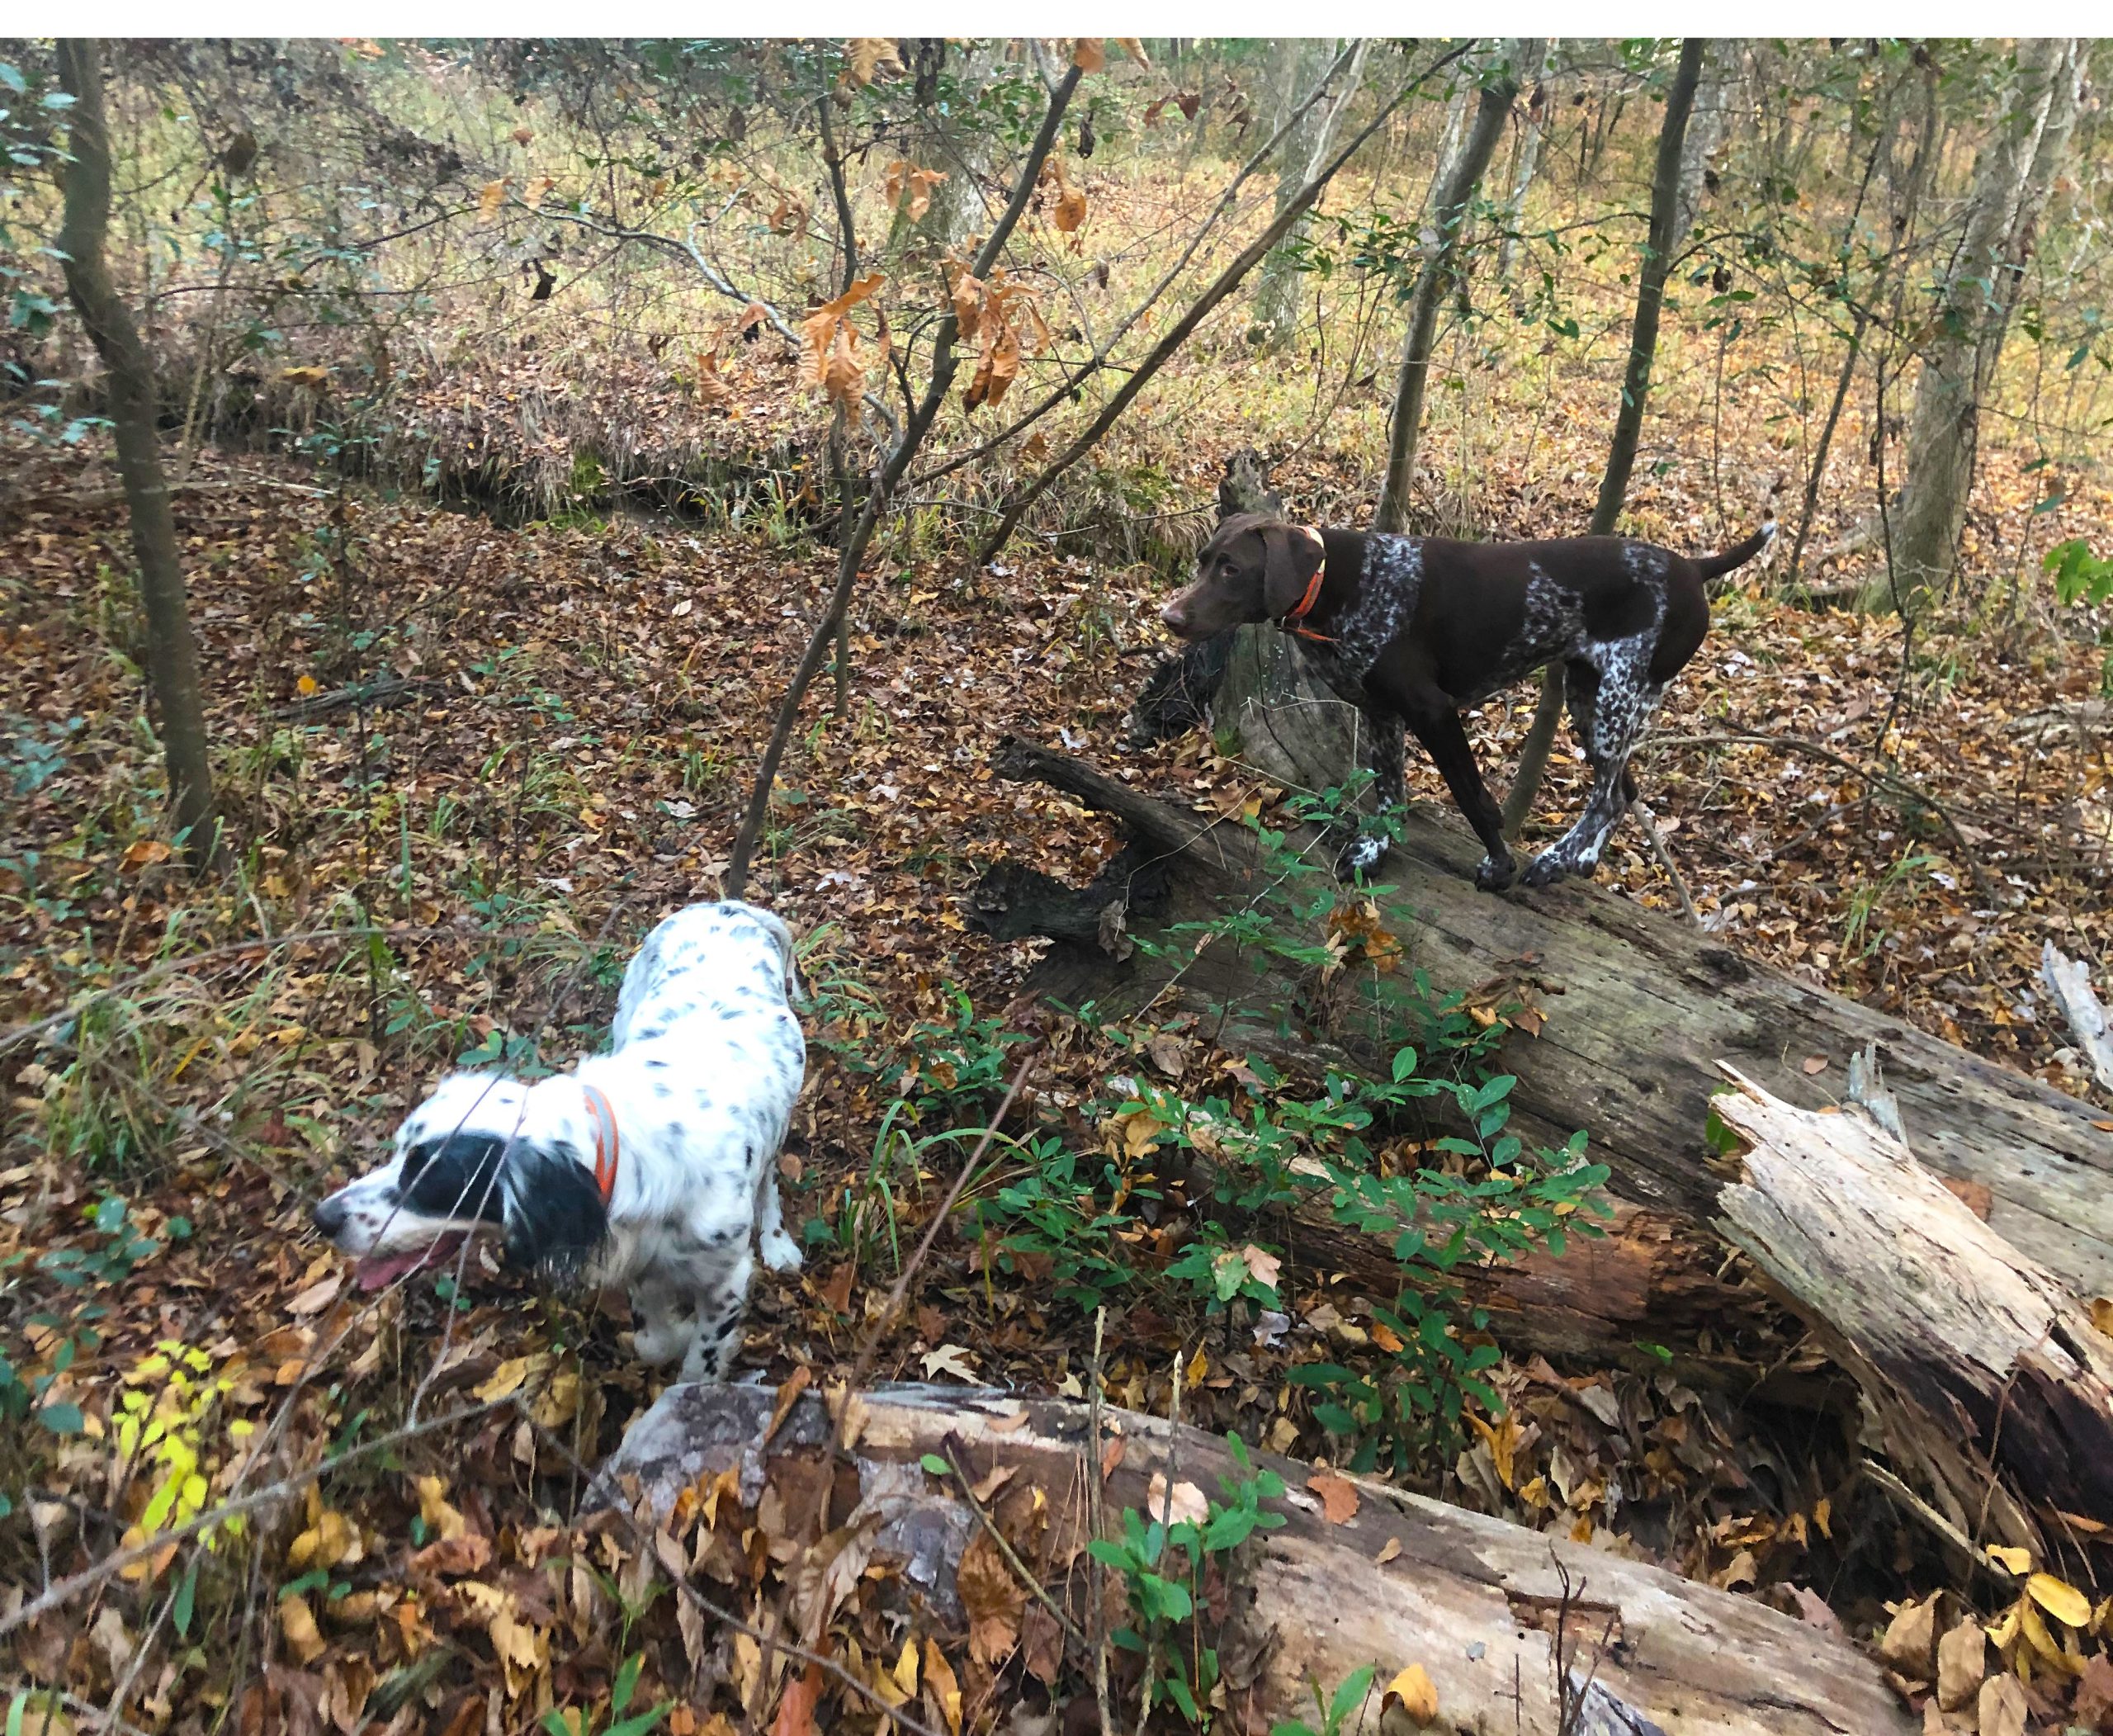 Sam, the setter, has found the birds, and Daisy, the GSP, is honoring the point while perched on a log. 
